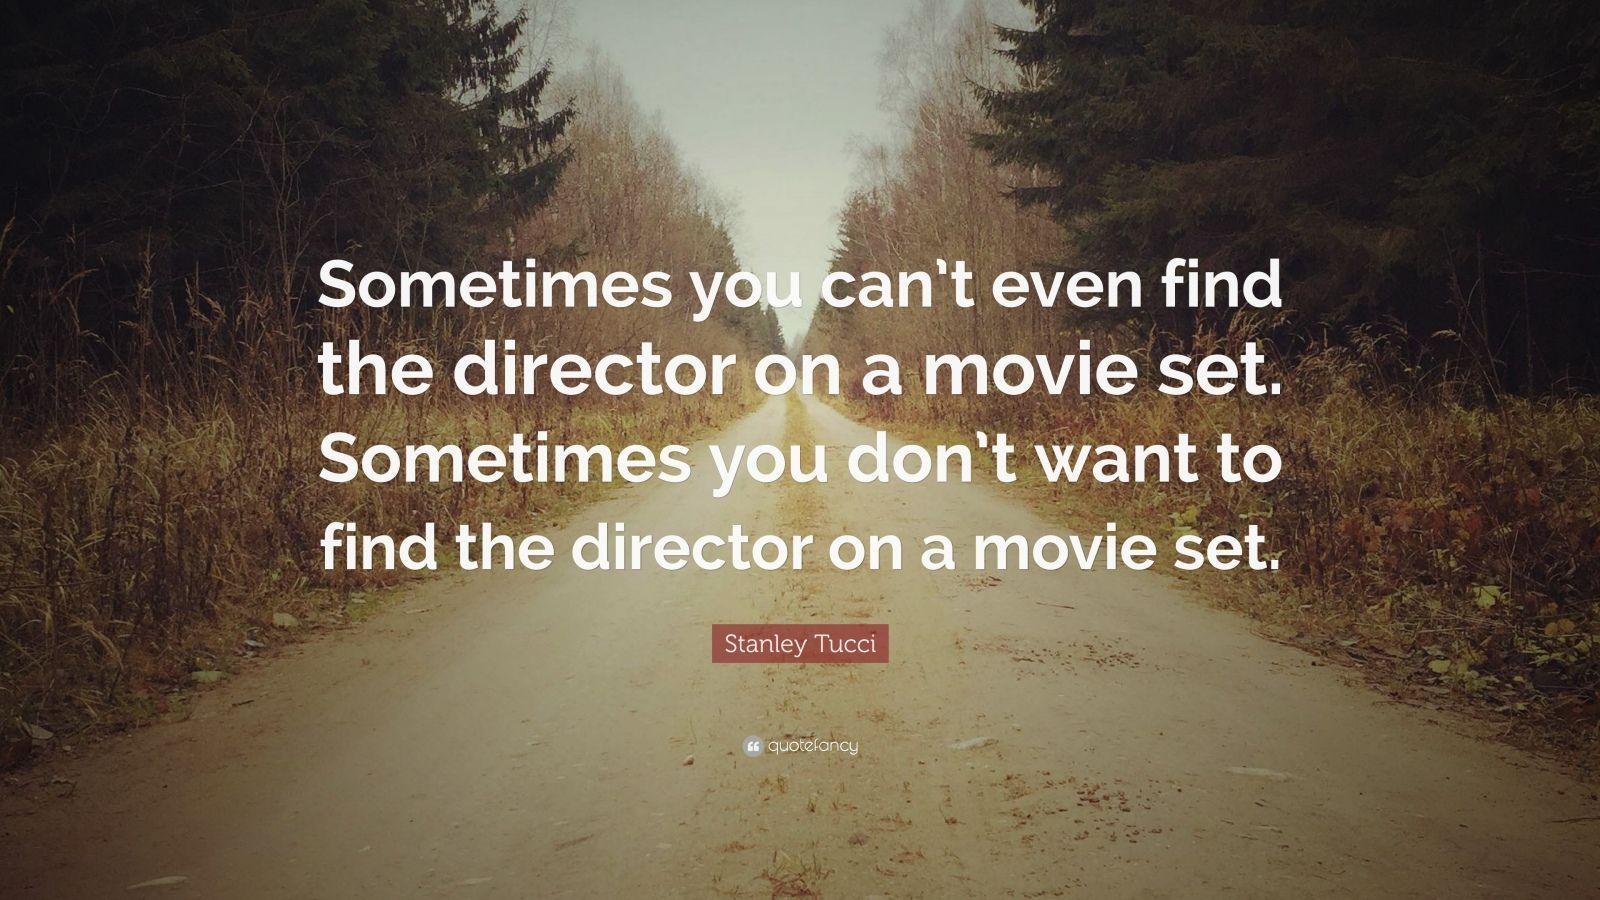 Stanley Tucci Quote: “Sometimes you can't even find the director